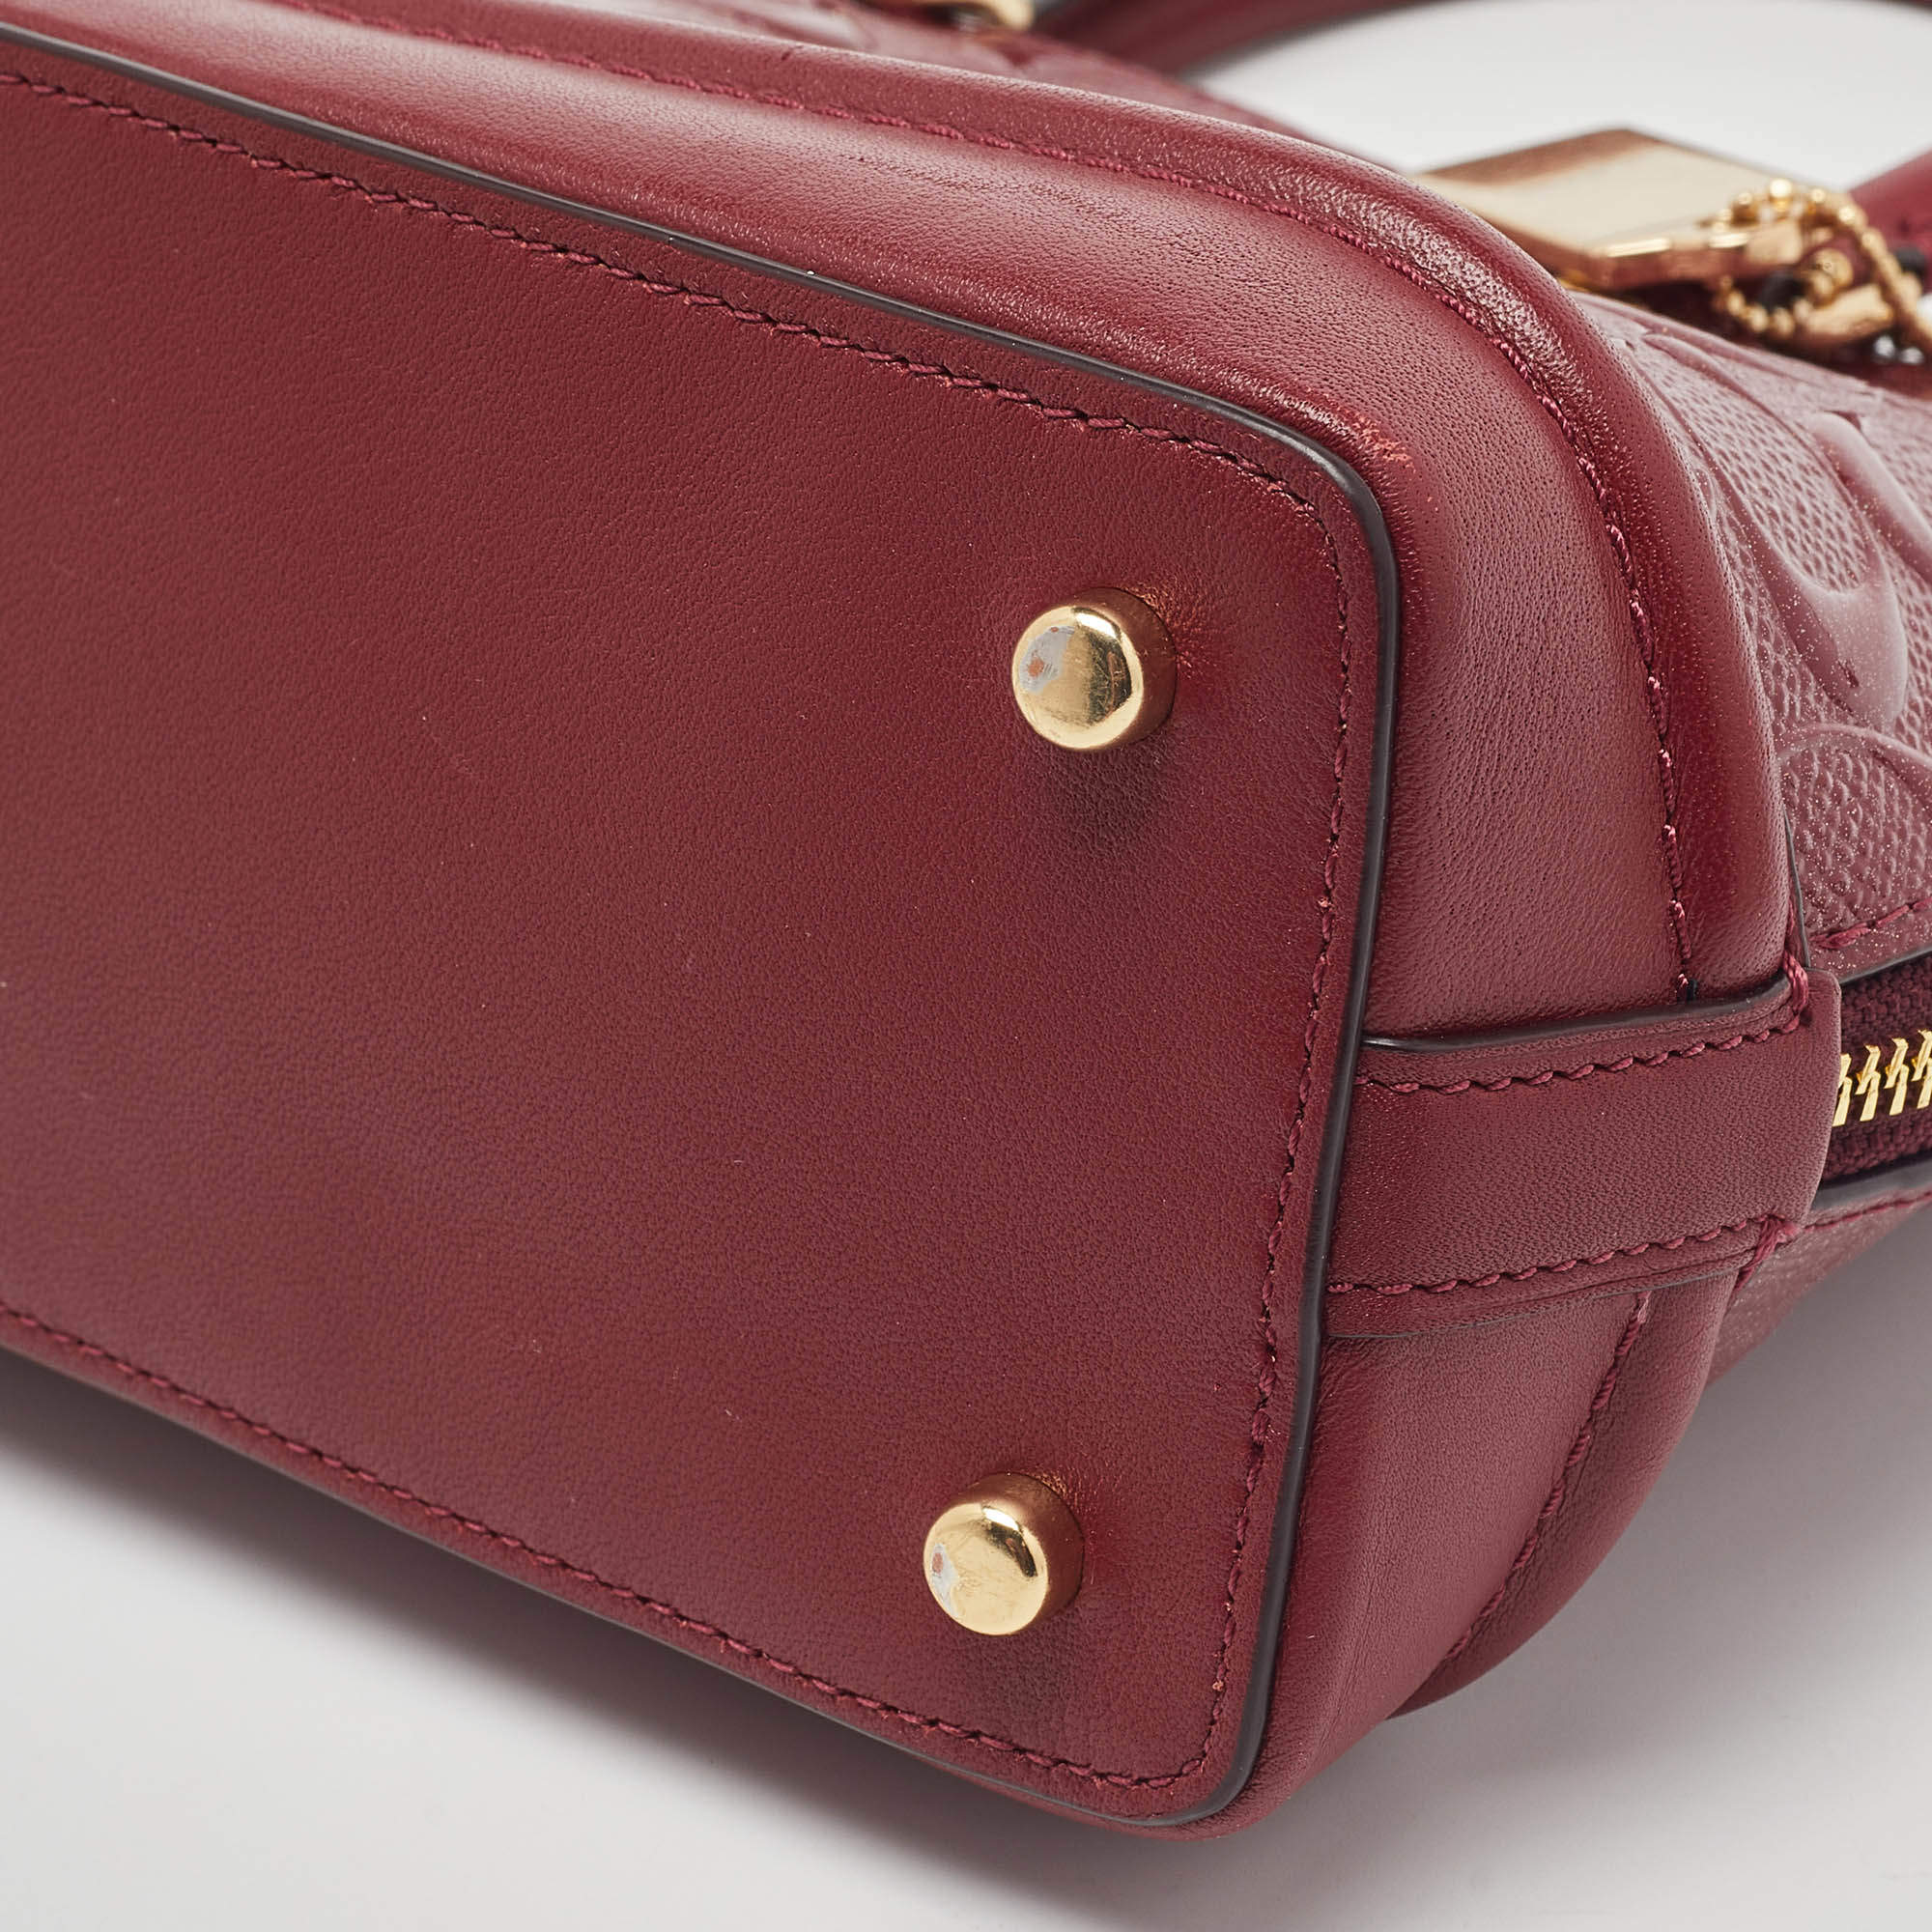 Coach Dark Red Signature Embossed Patent and Leather Mini Sierra